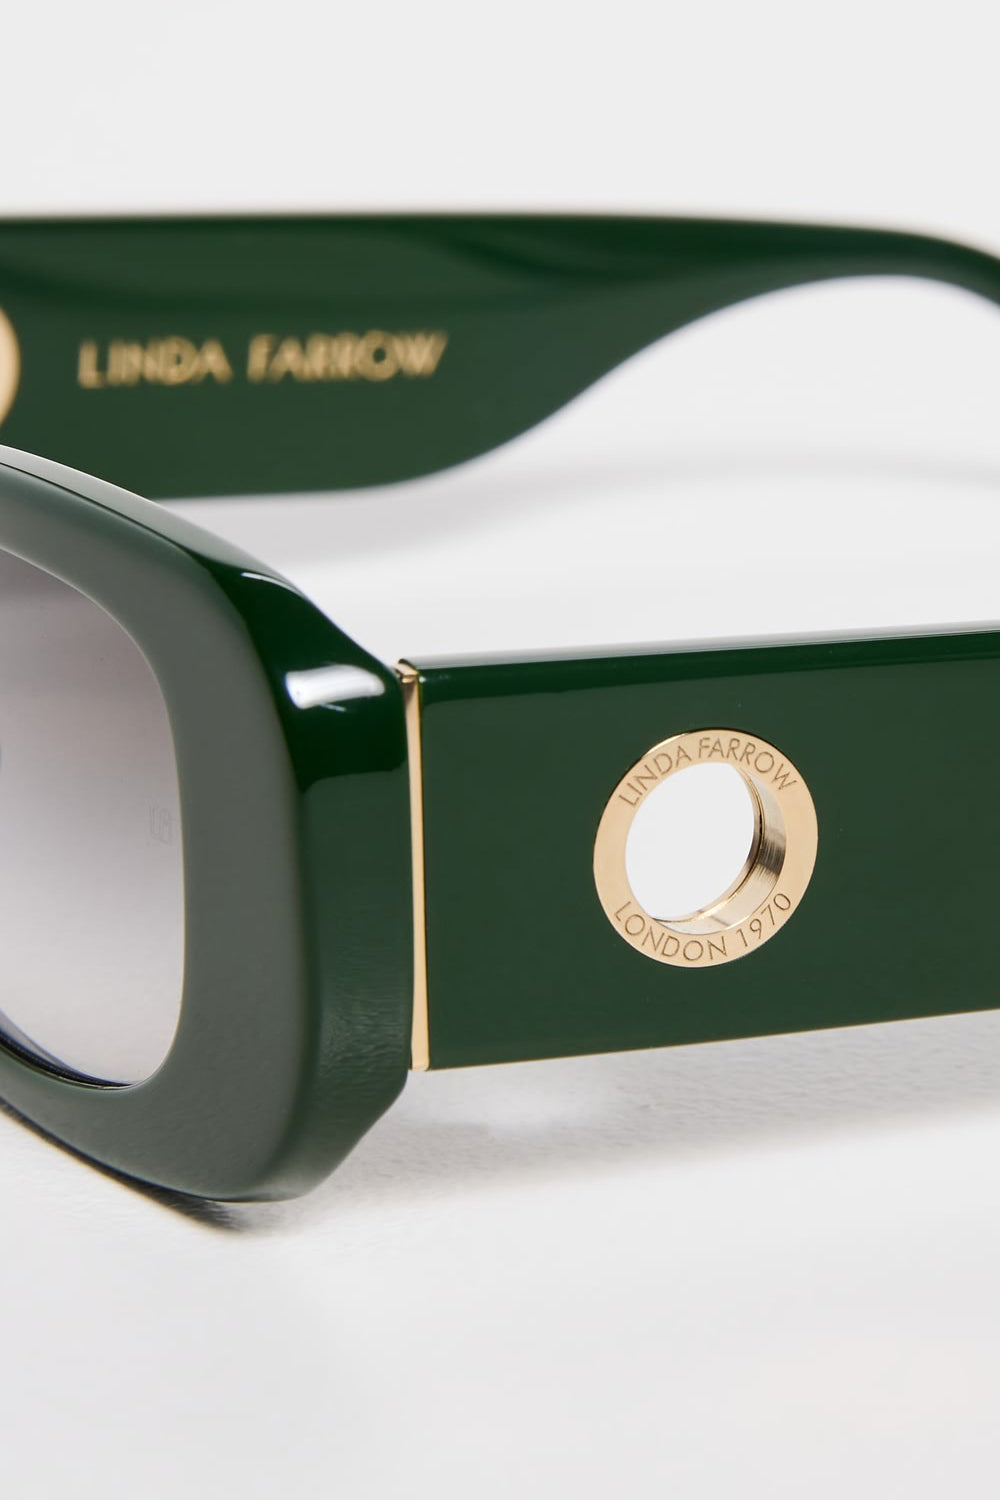 Taylor Rectangular Sunglasses in Yellow Gold and Green by LINDA